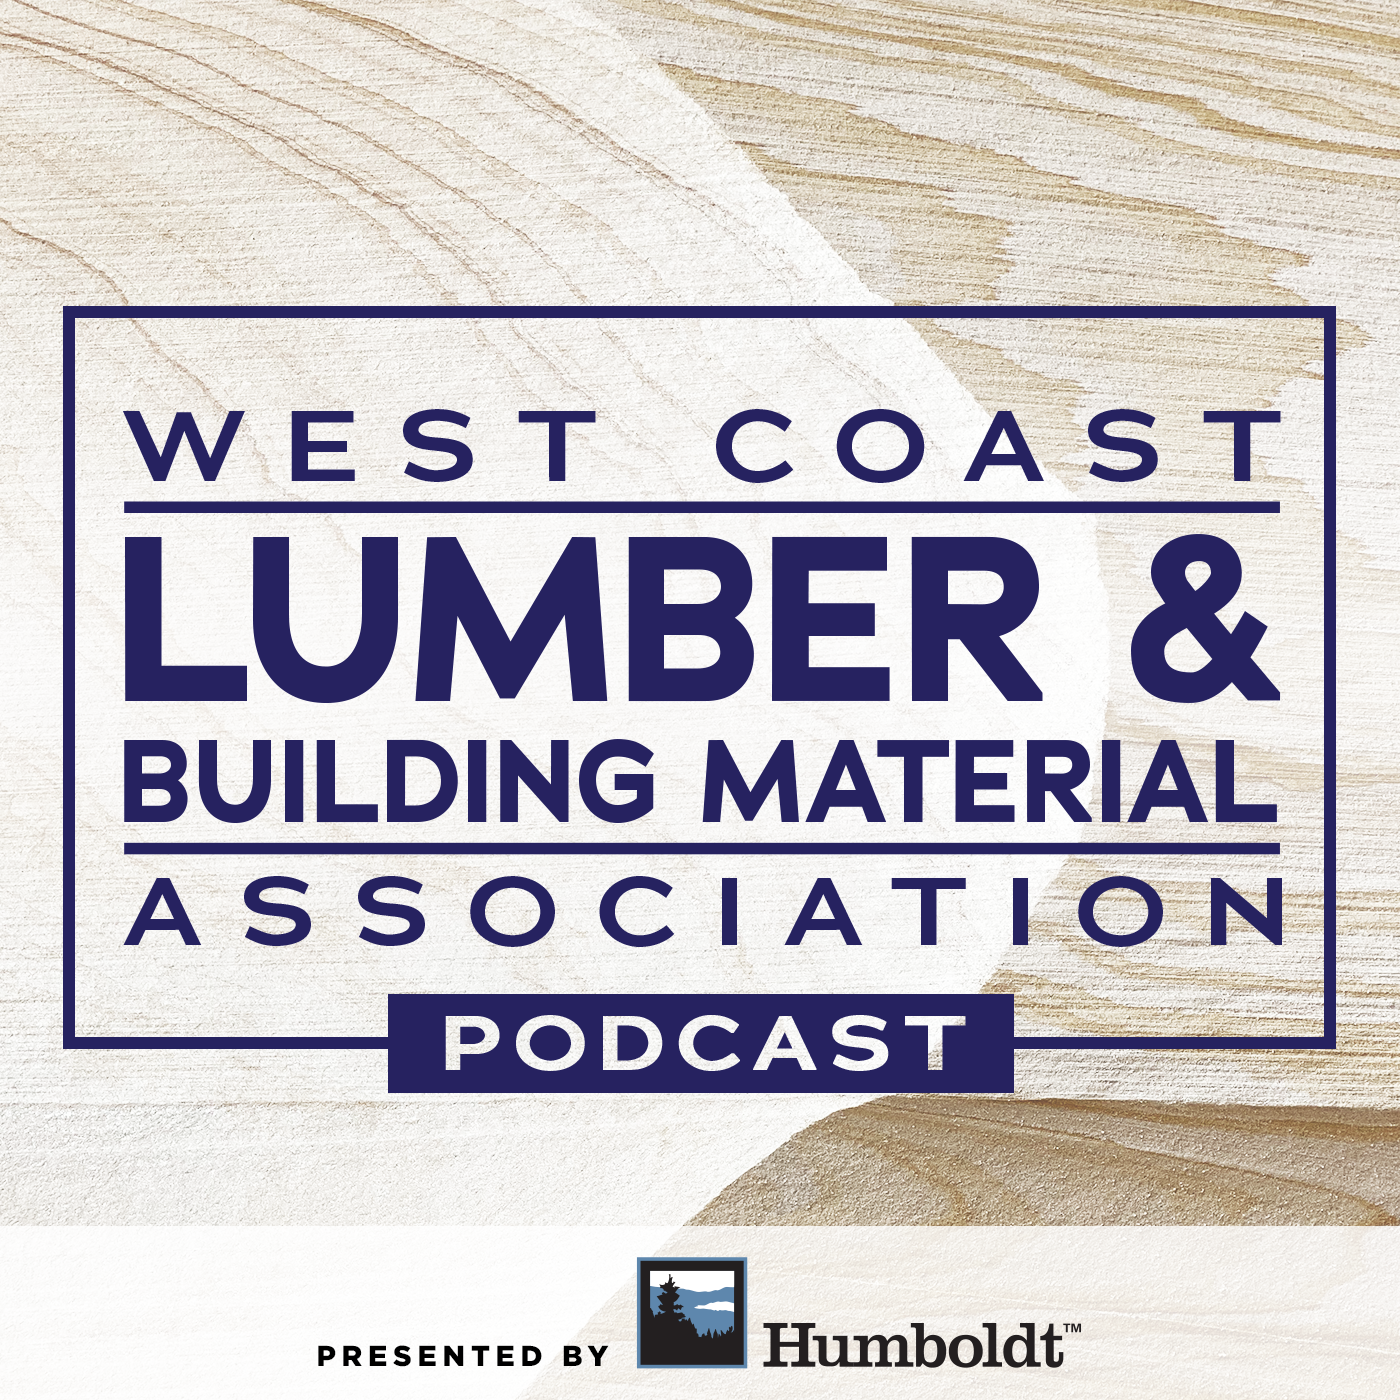 The WCLBMA Podcast: Episode 1 - Welcome